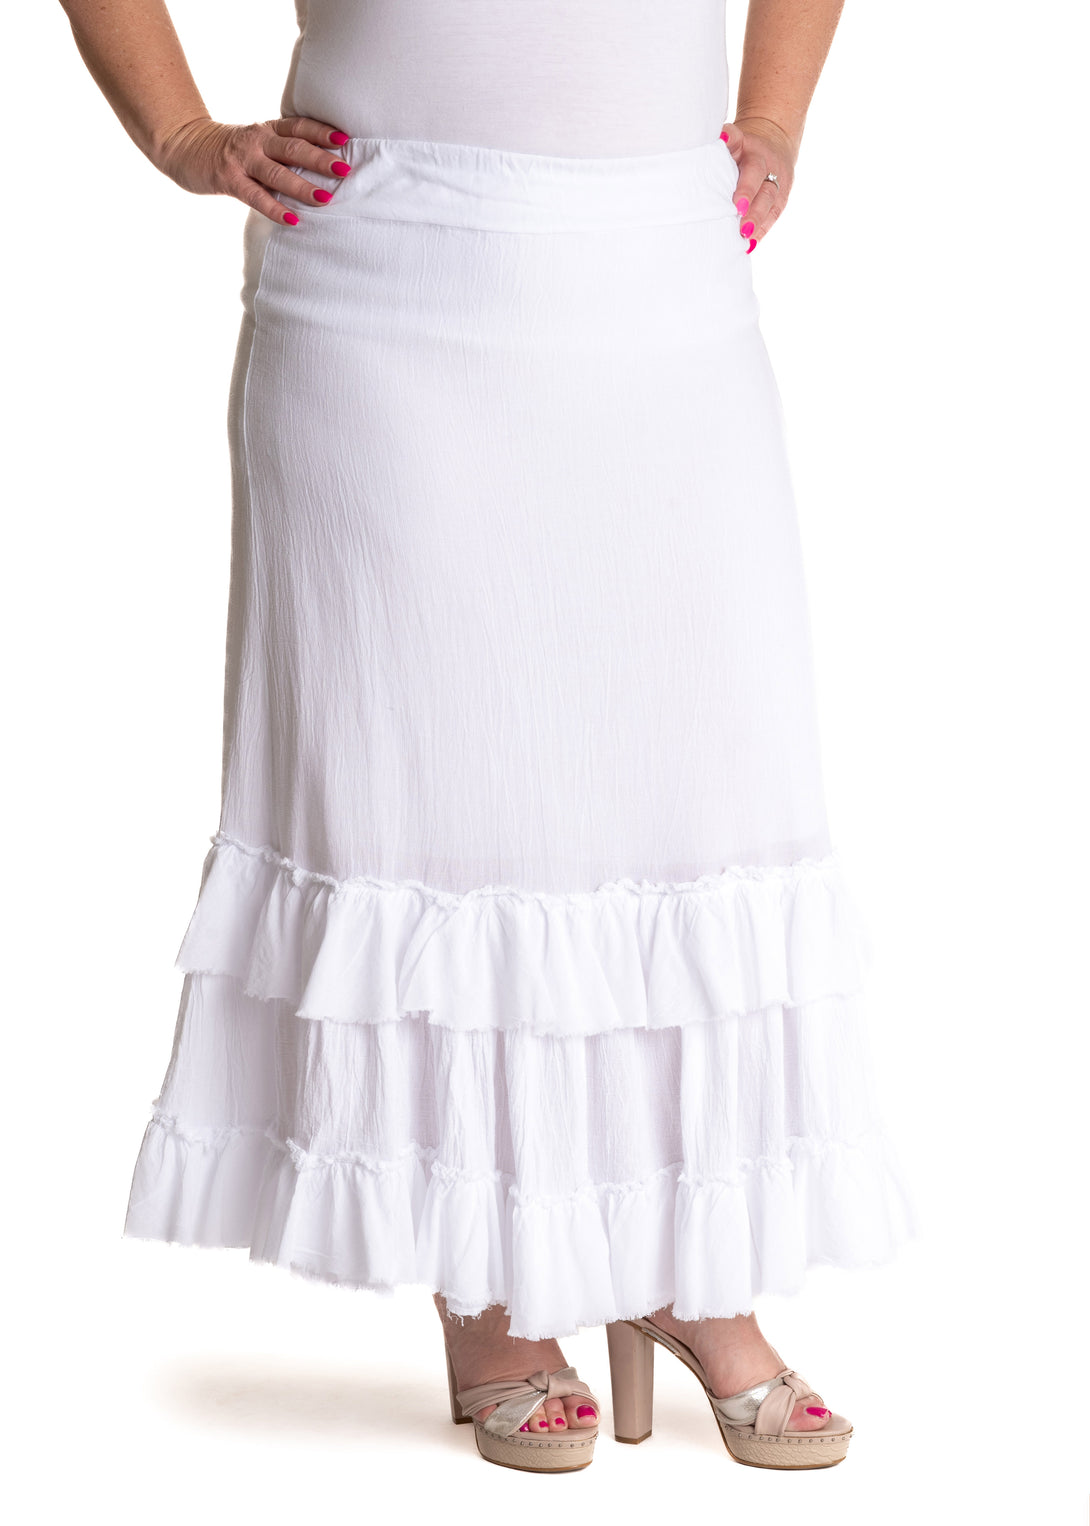 Rylee Cotton Frill Skirt in White - Imagine Fashion